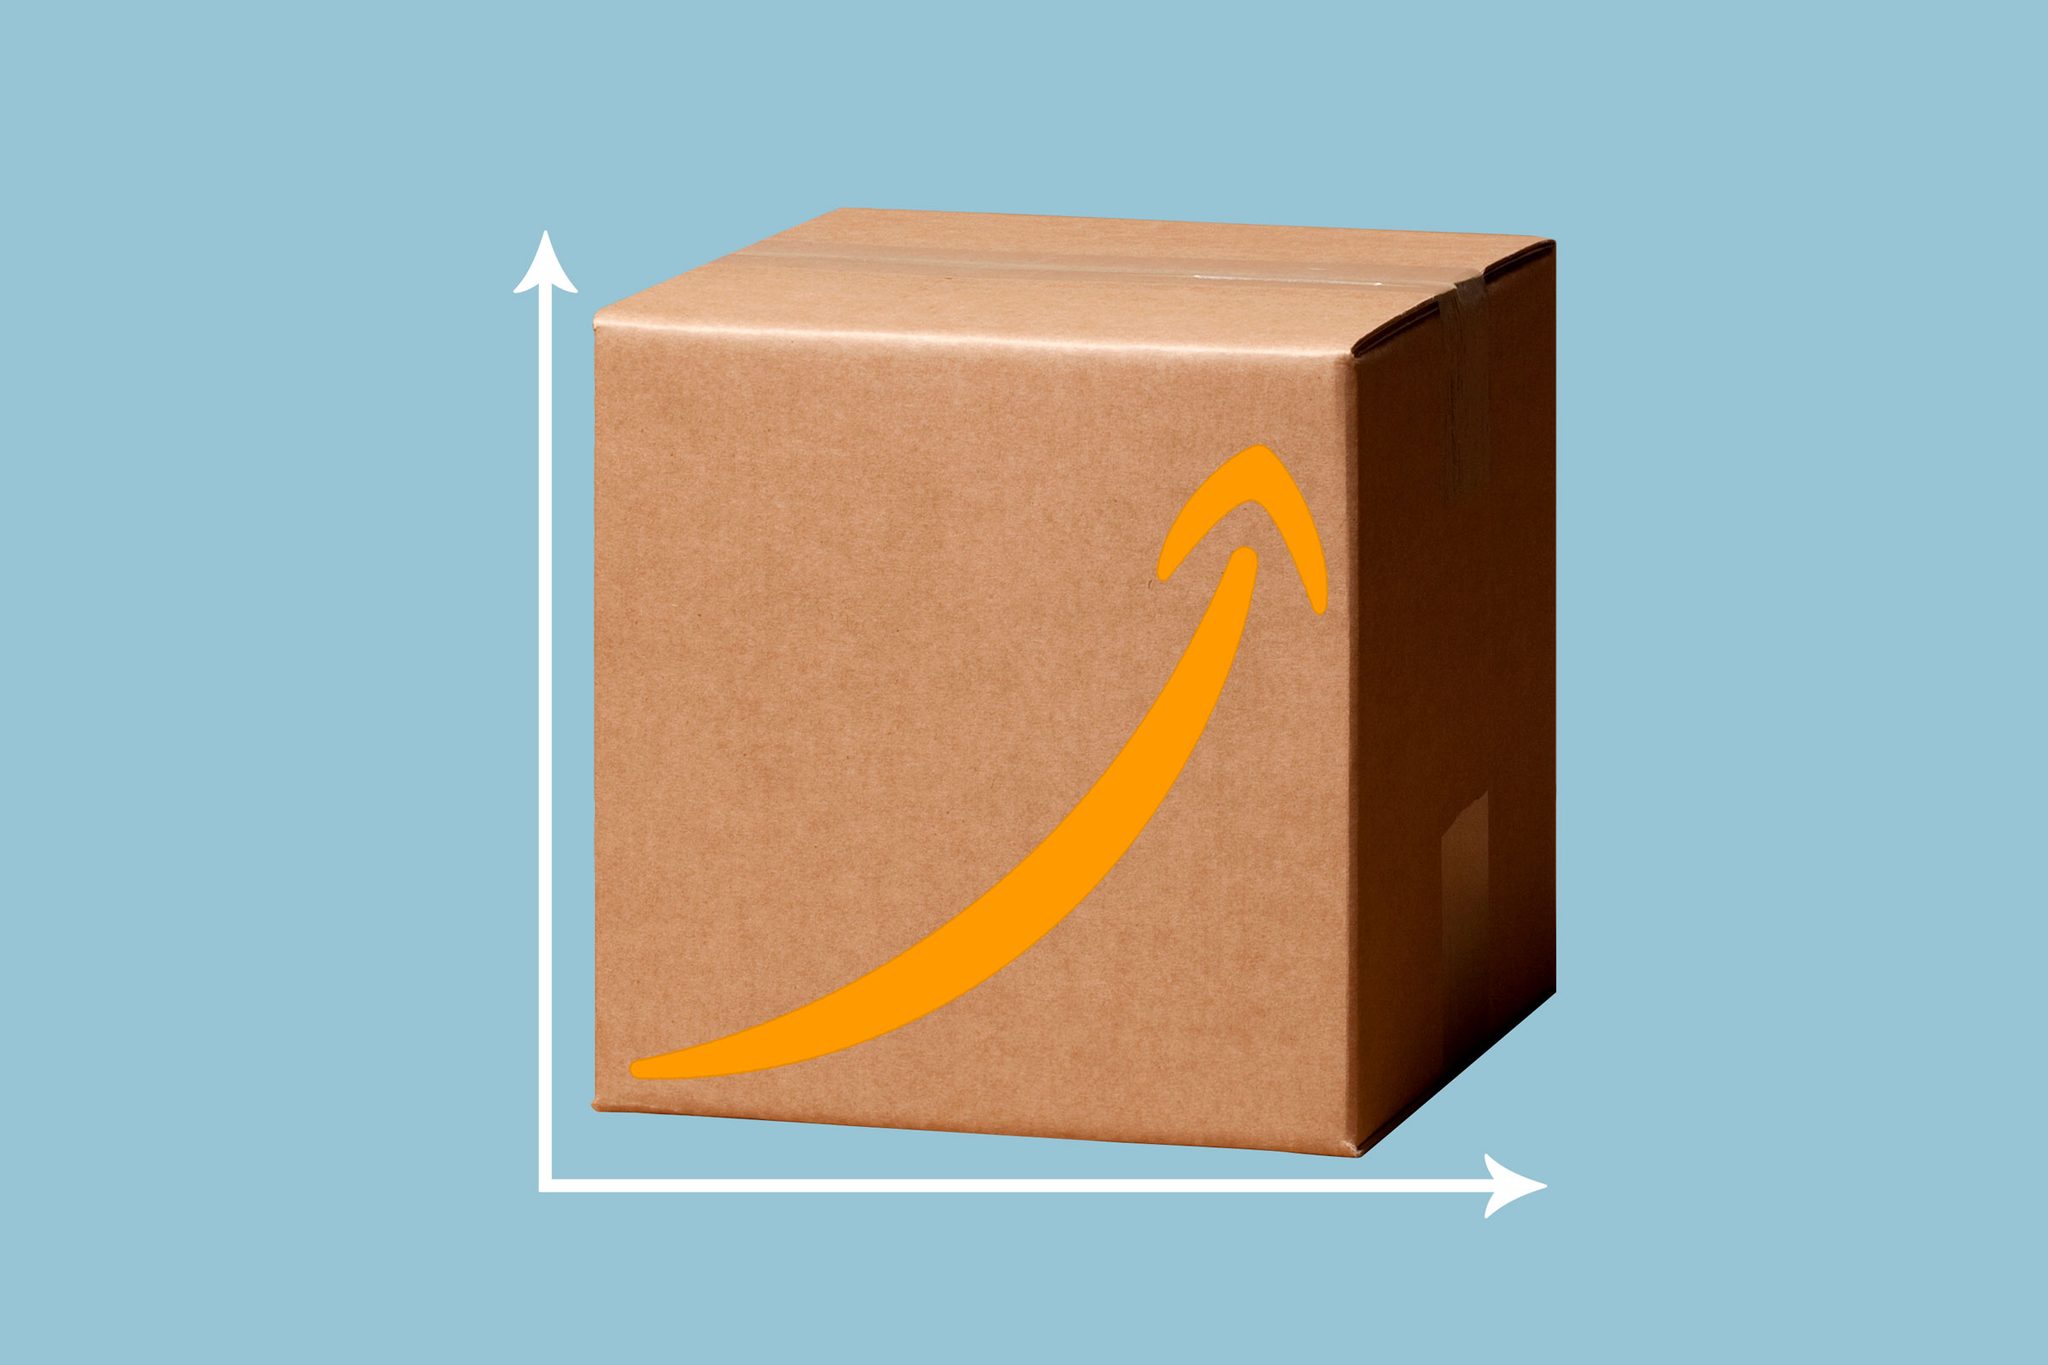 How to Avoid the Amazon Prime Price Increase for One More Year